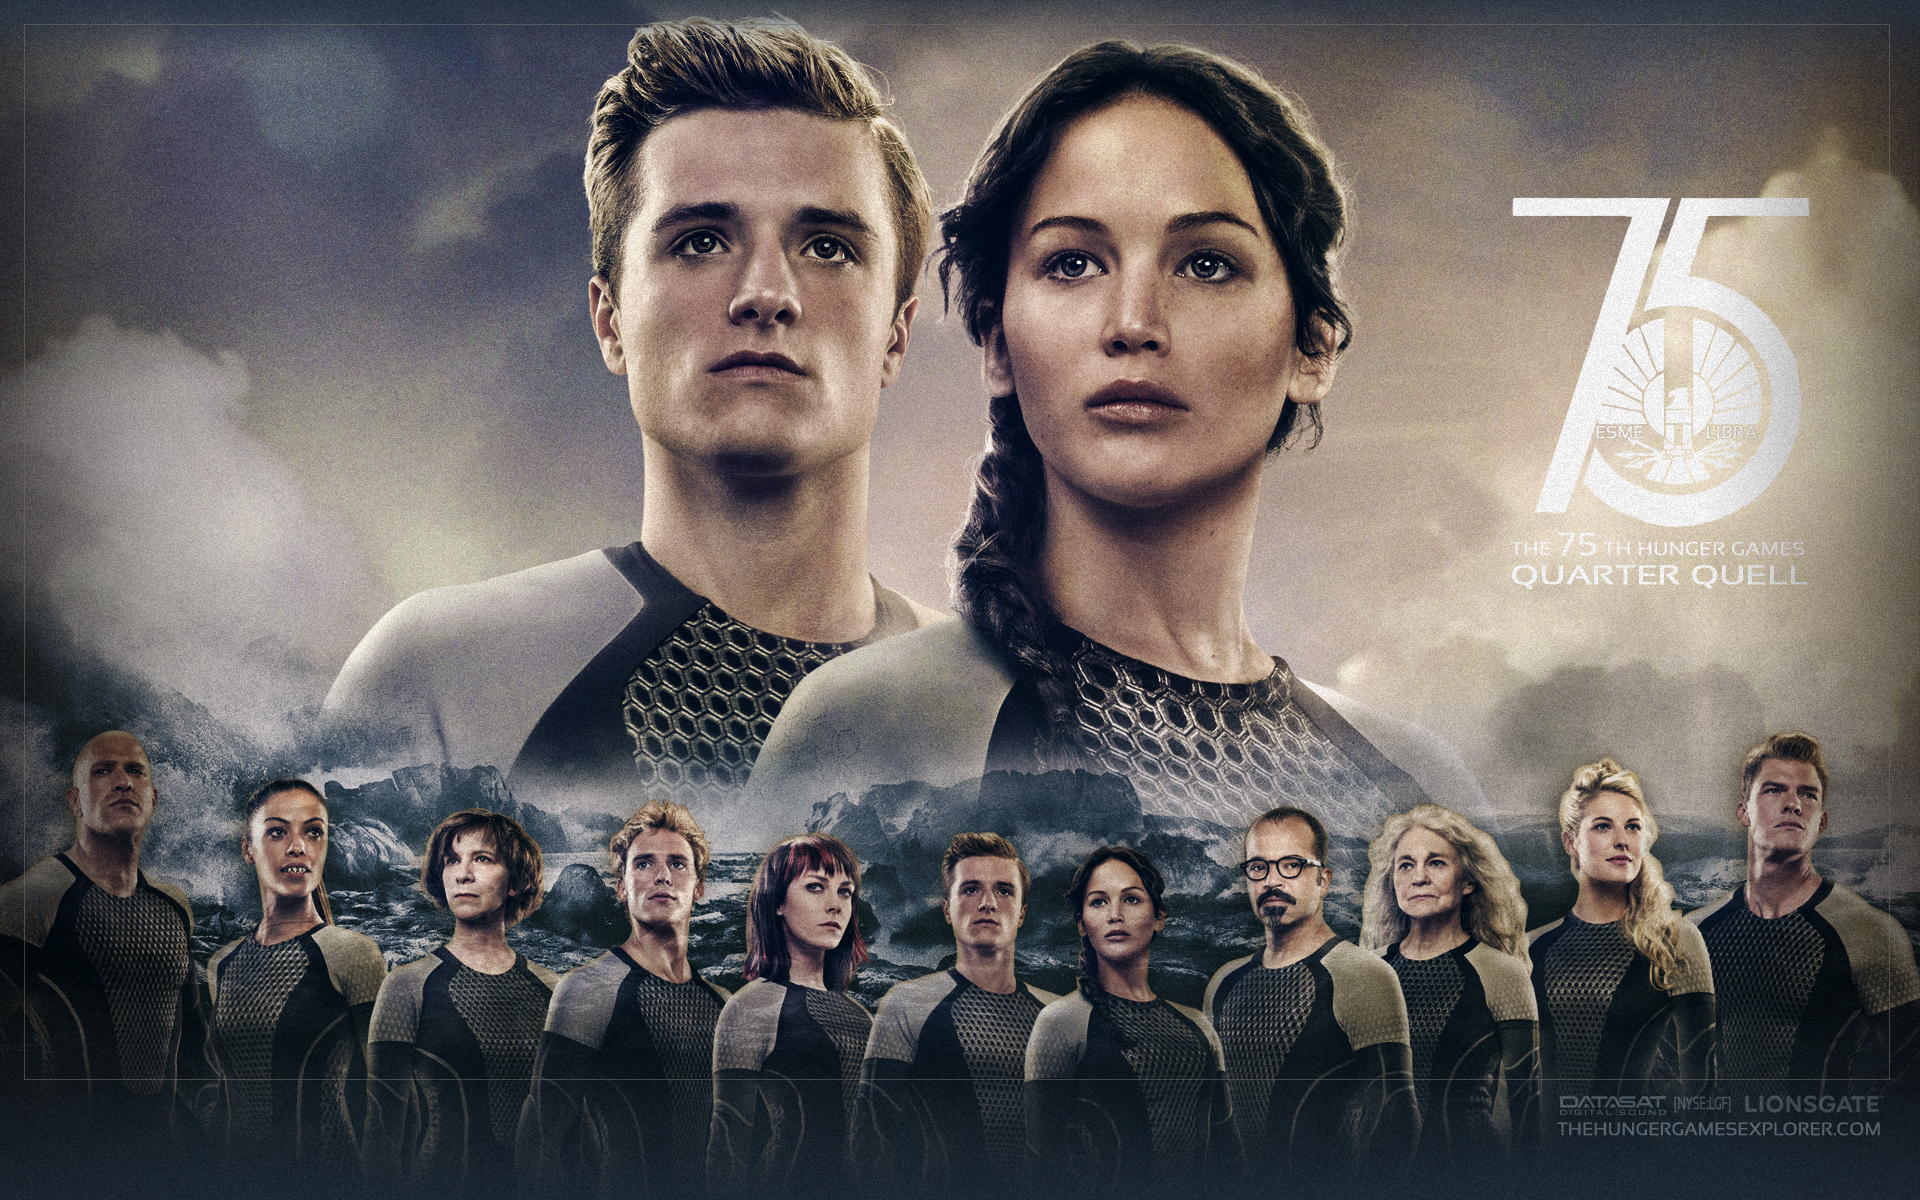 The Hunger Games - Catching Fire Wallpaper by esme-libra on DeviantArt